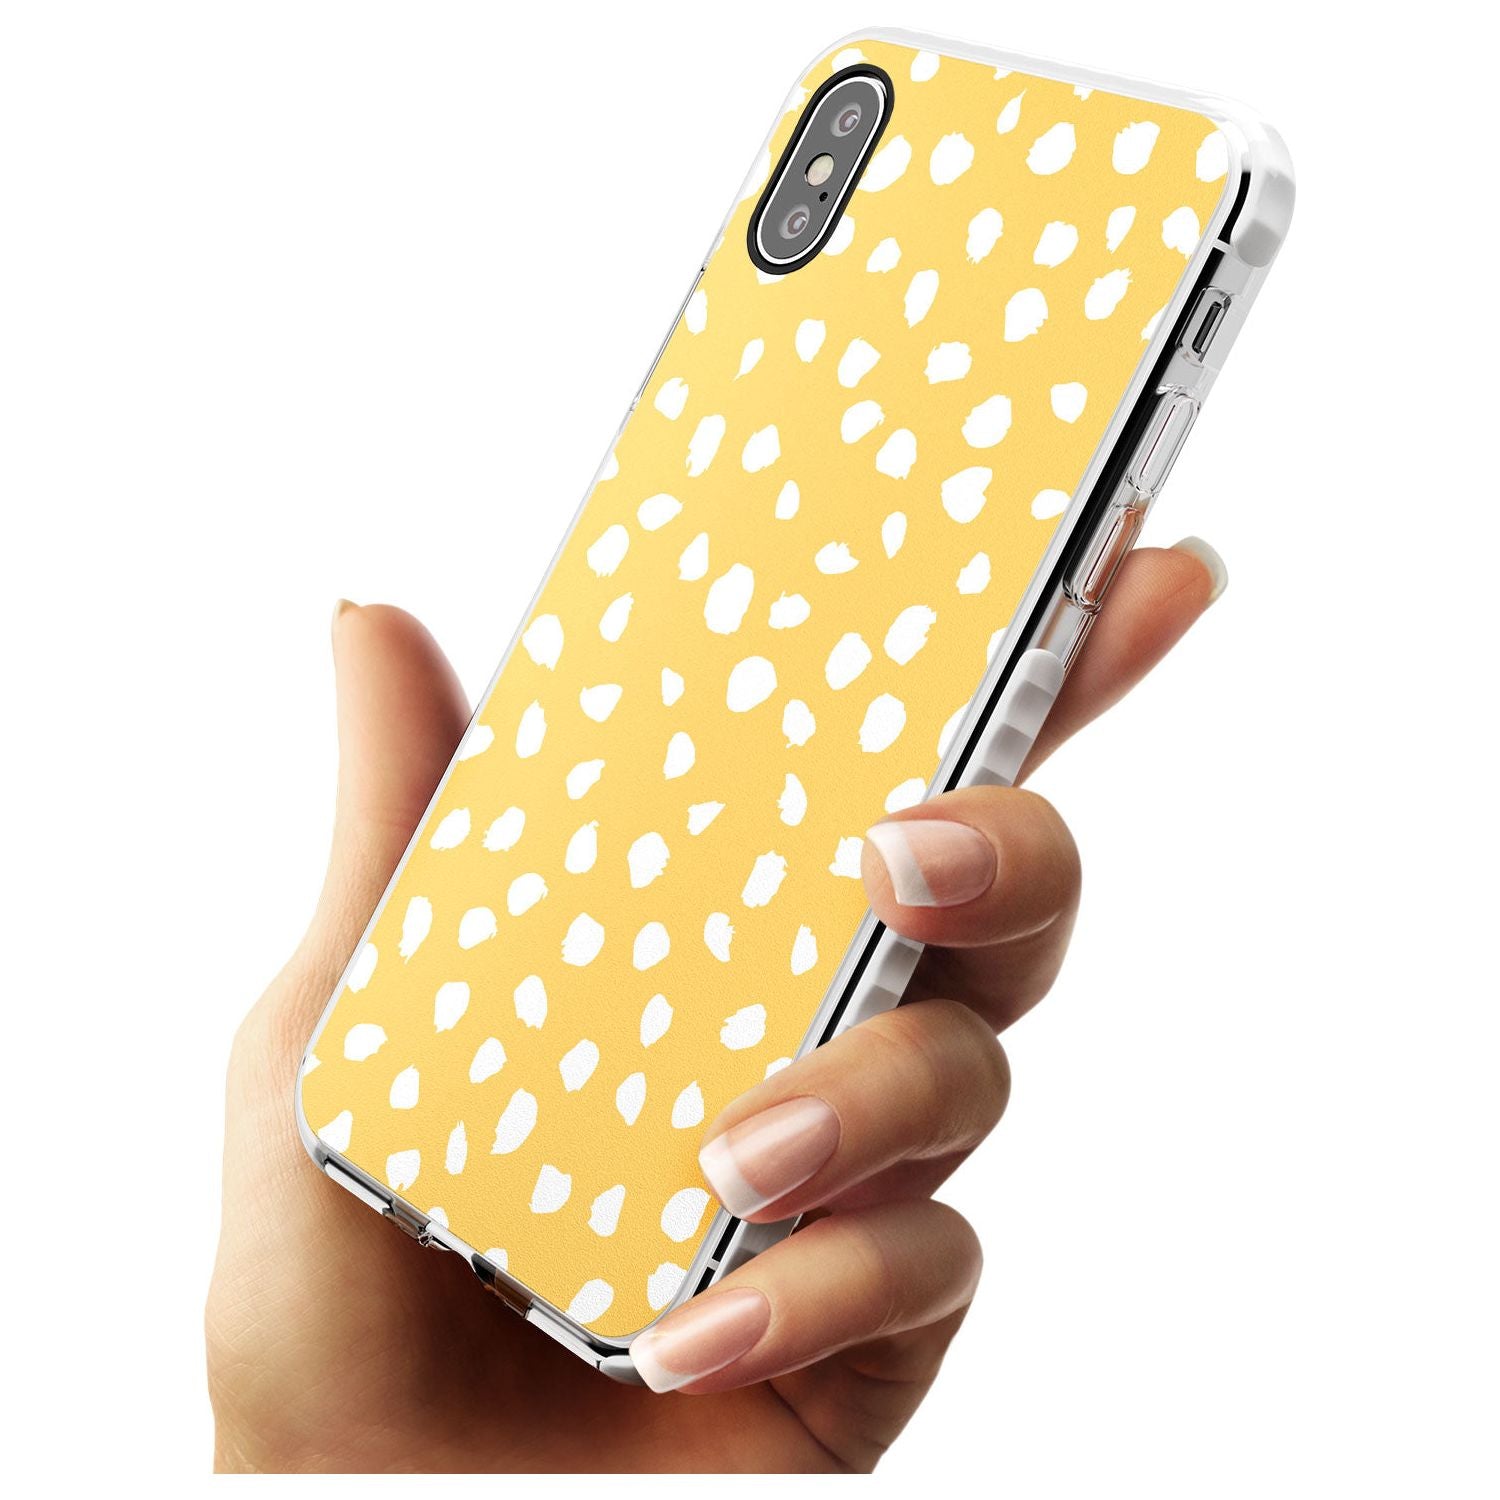 White on Yellow Dalmatian Polka Dot Spots Impact Phone Case for iPhone X XS Max XR